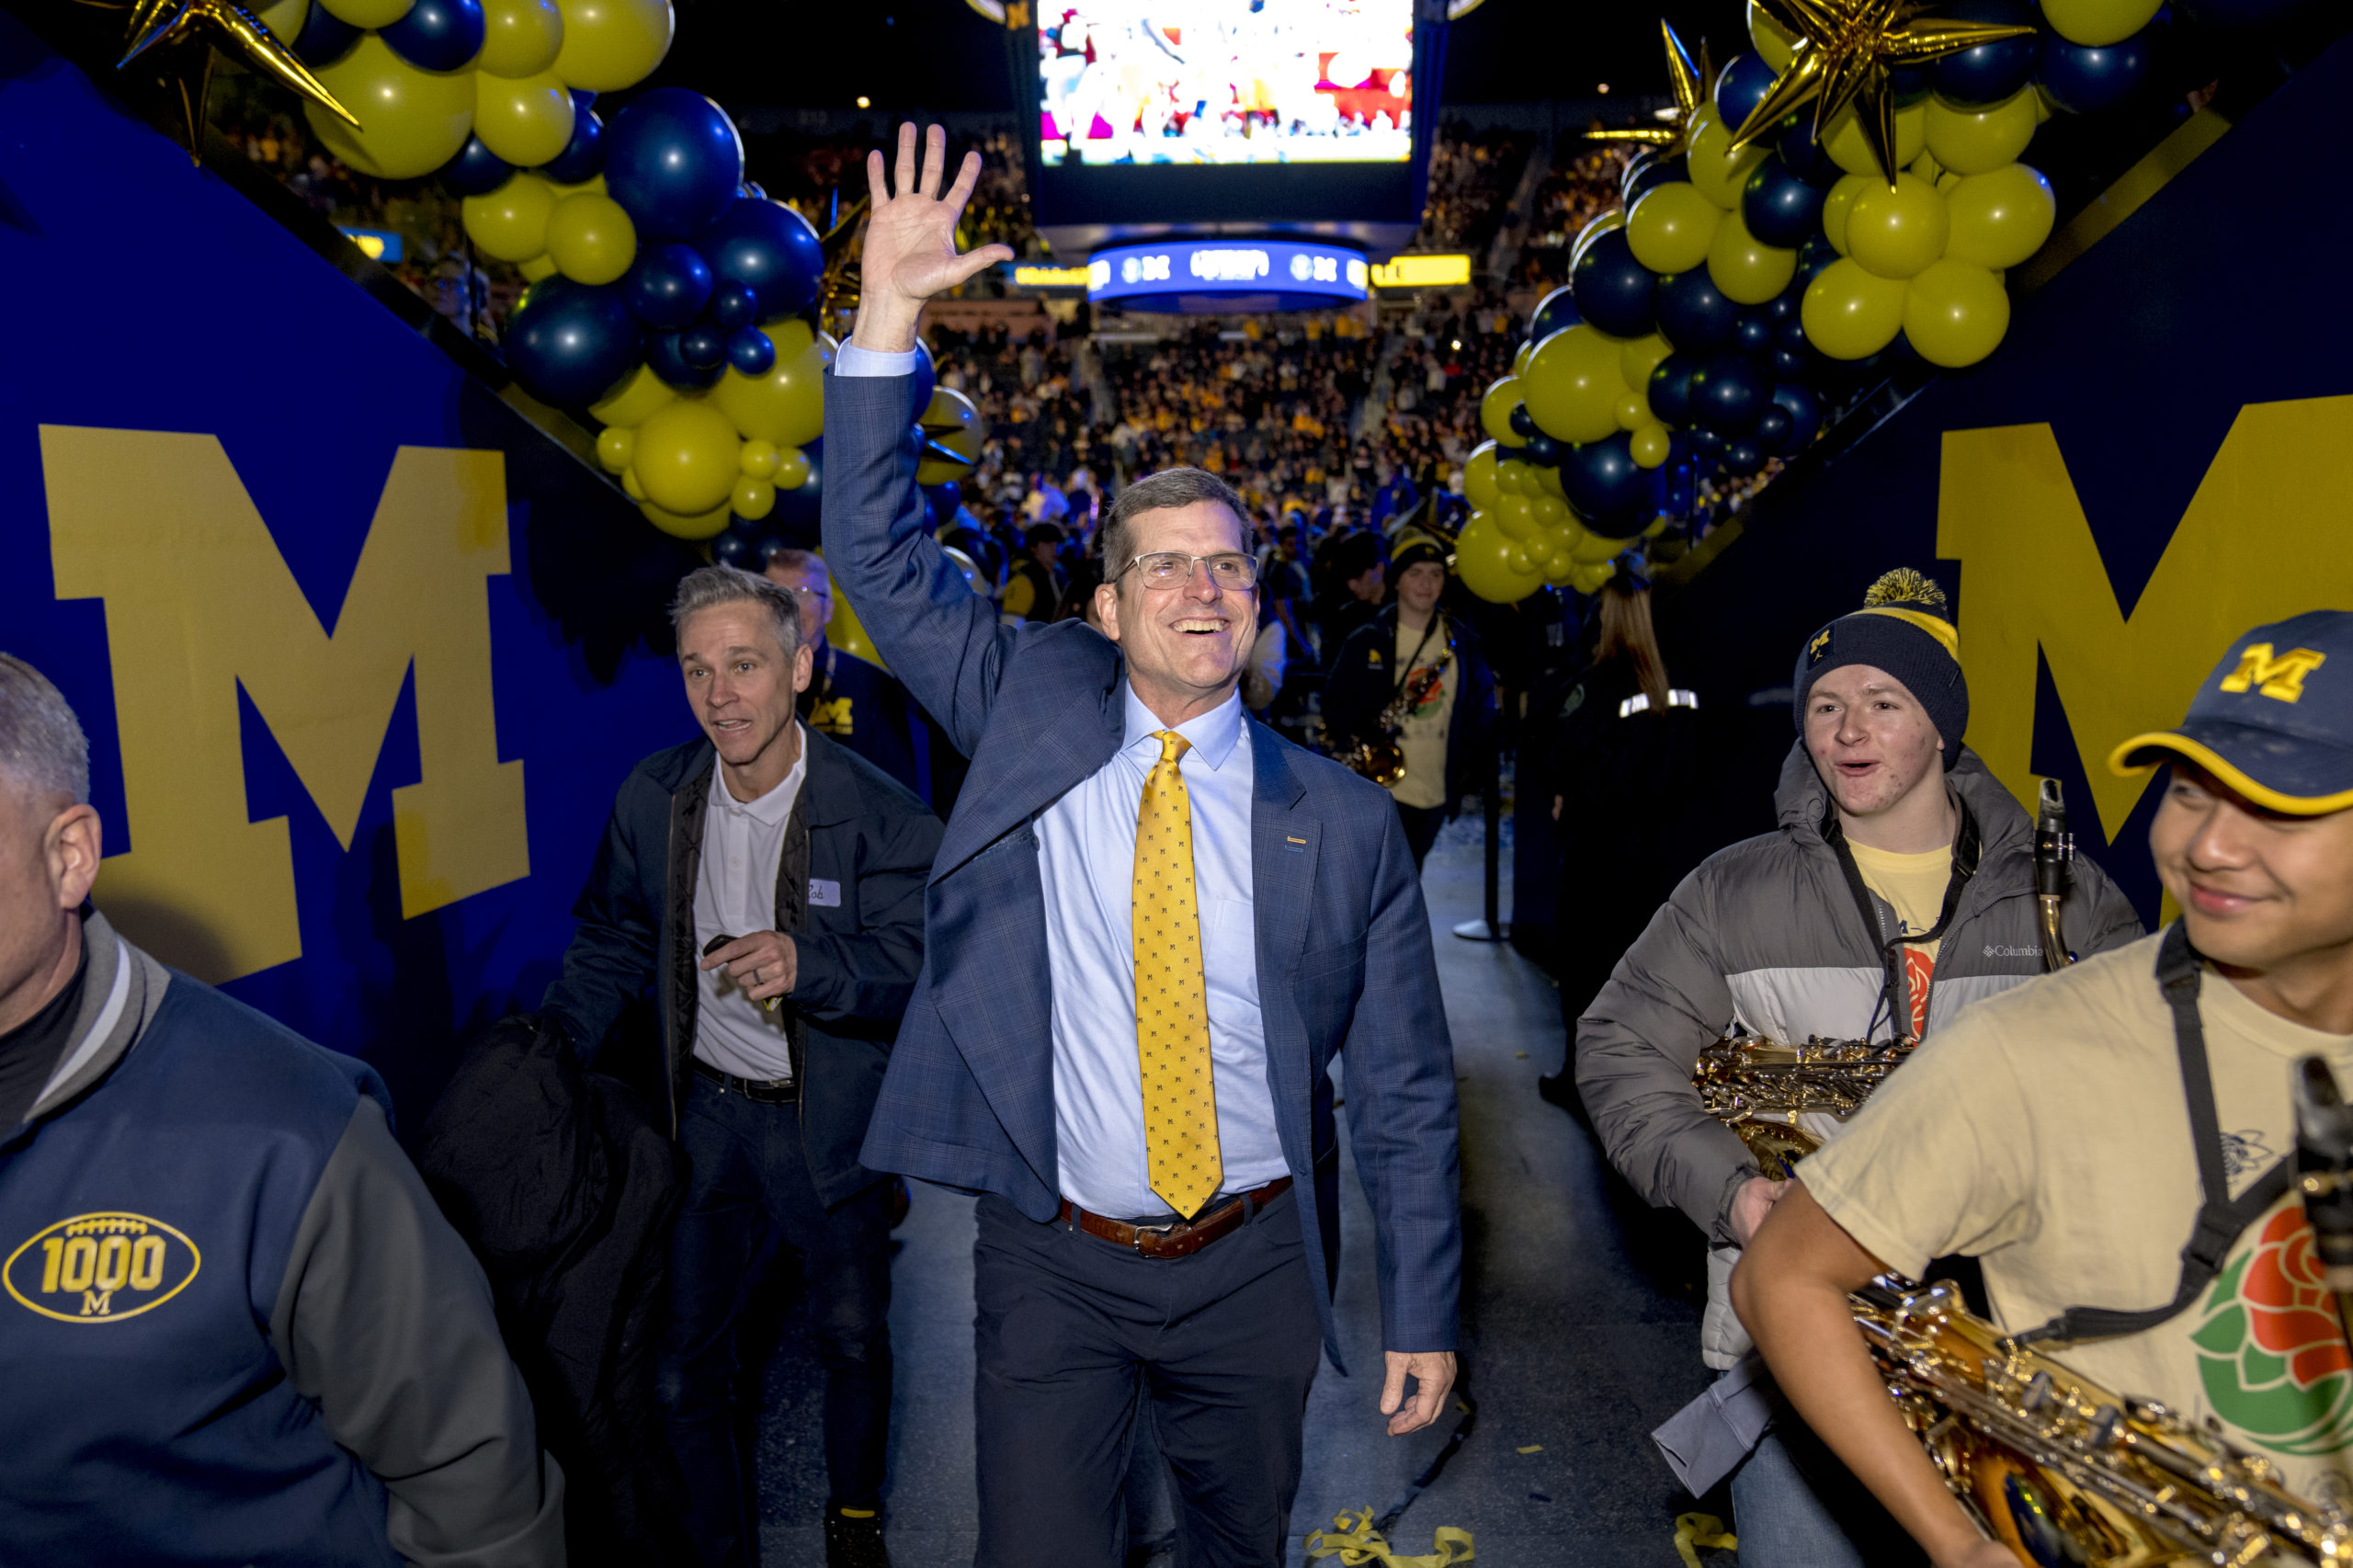 ANN ARBOR, MICHIGAN - JANUARY 13: Head coach Jim Harbaugh of the Michigan Wolverines waves to fans after the Michigan Wolverines football National Championship celebration on January 13, 2024 at Crisler Center in Ann Arbor, Michigan. Nic Antaya/Getty Images